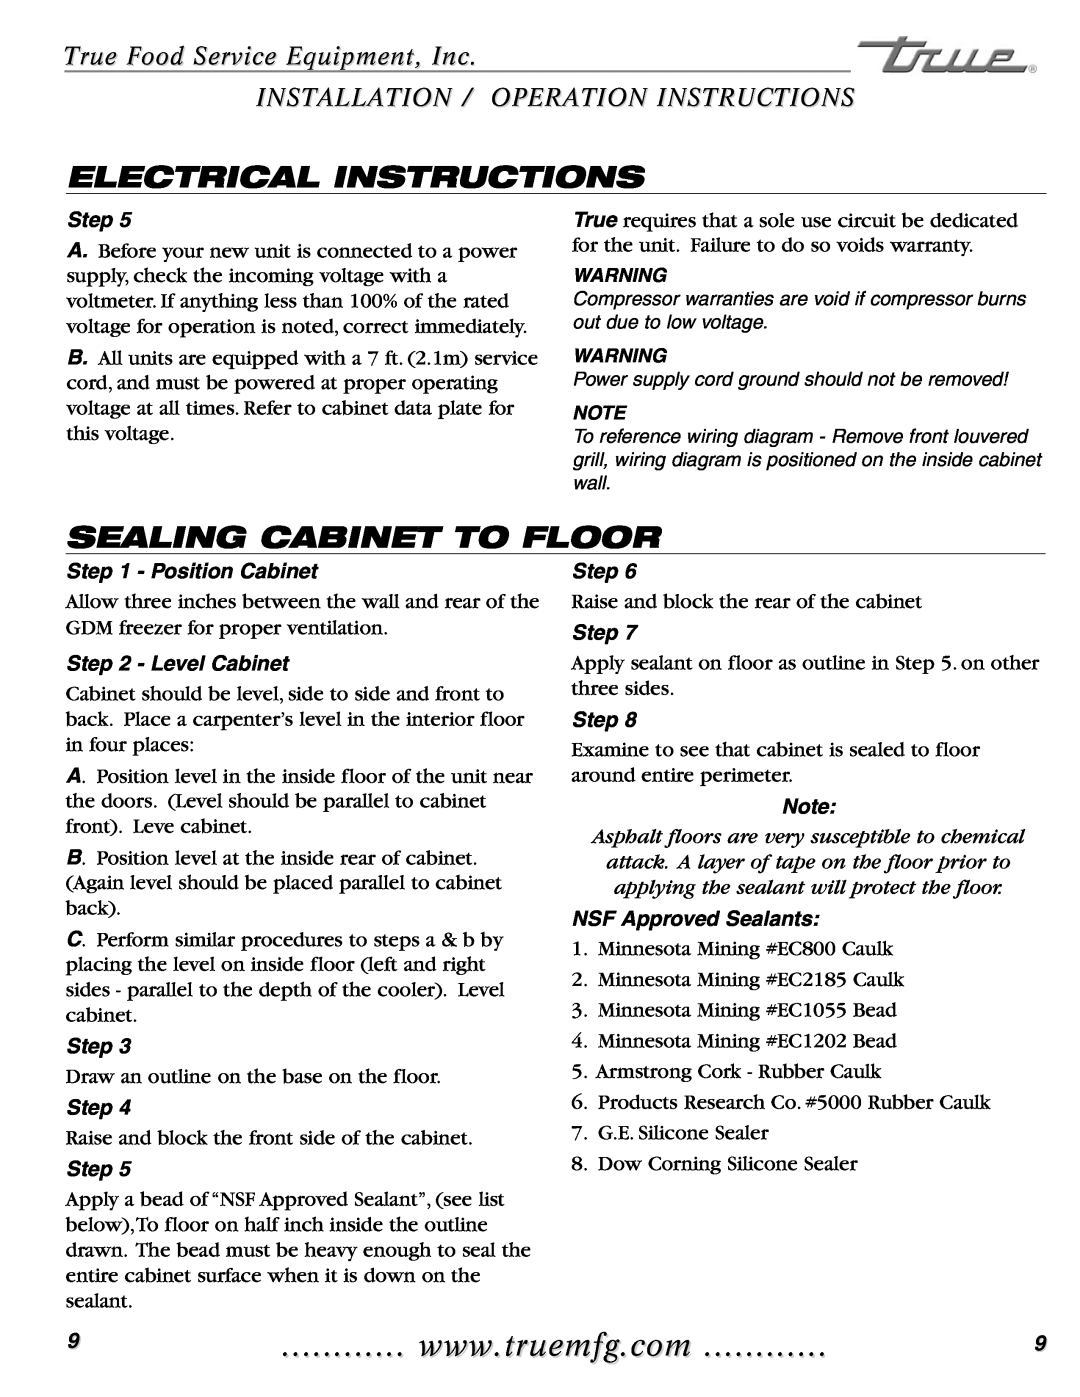 True Manufacturing Company GDIM-26 Electrical Instructions, Sealing Cabinet To Floor, Position Cabinet, Level Cabinet 